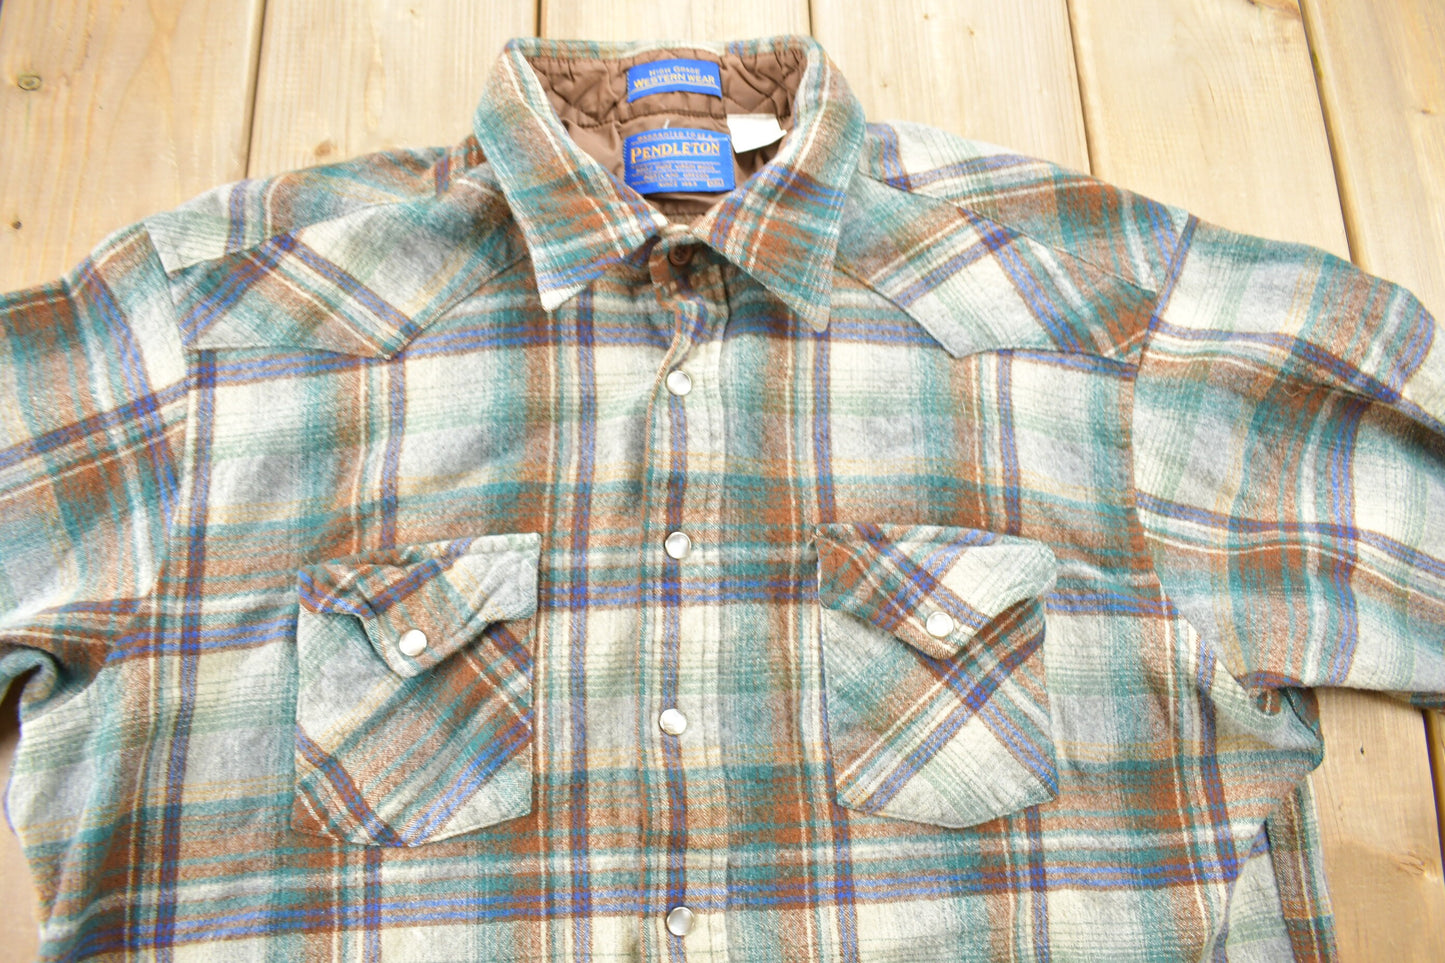 Vintage 1990s Pendleton Plaid Button Up Board Shirt / 100% Virgin Wool / Outdoor / Made In USA / High Grade Western Wear / Pearl Snap